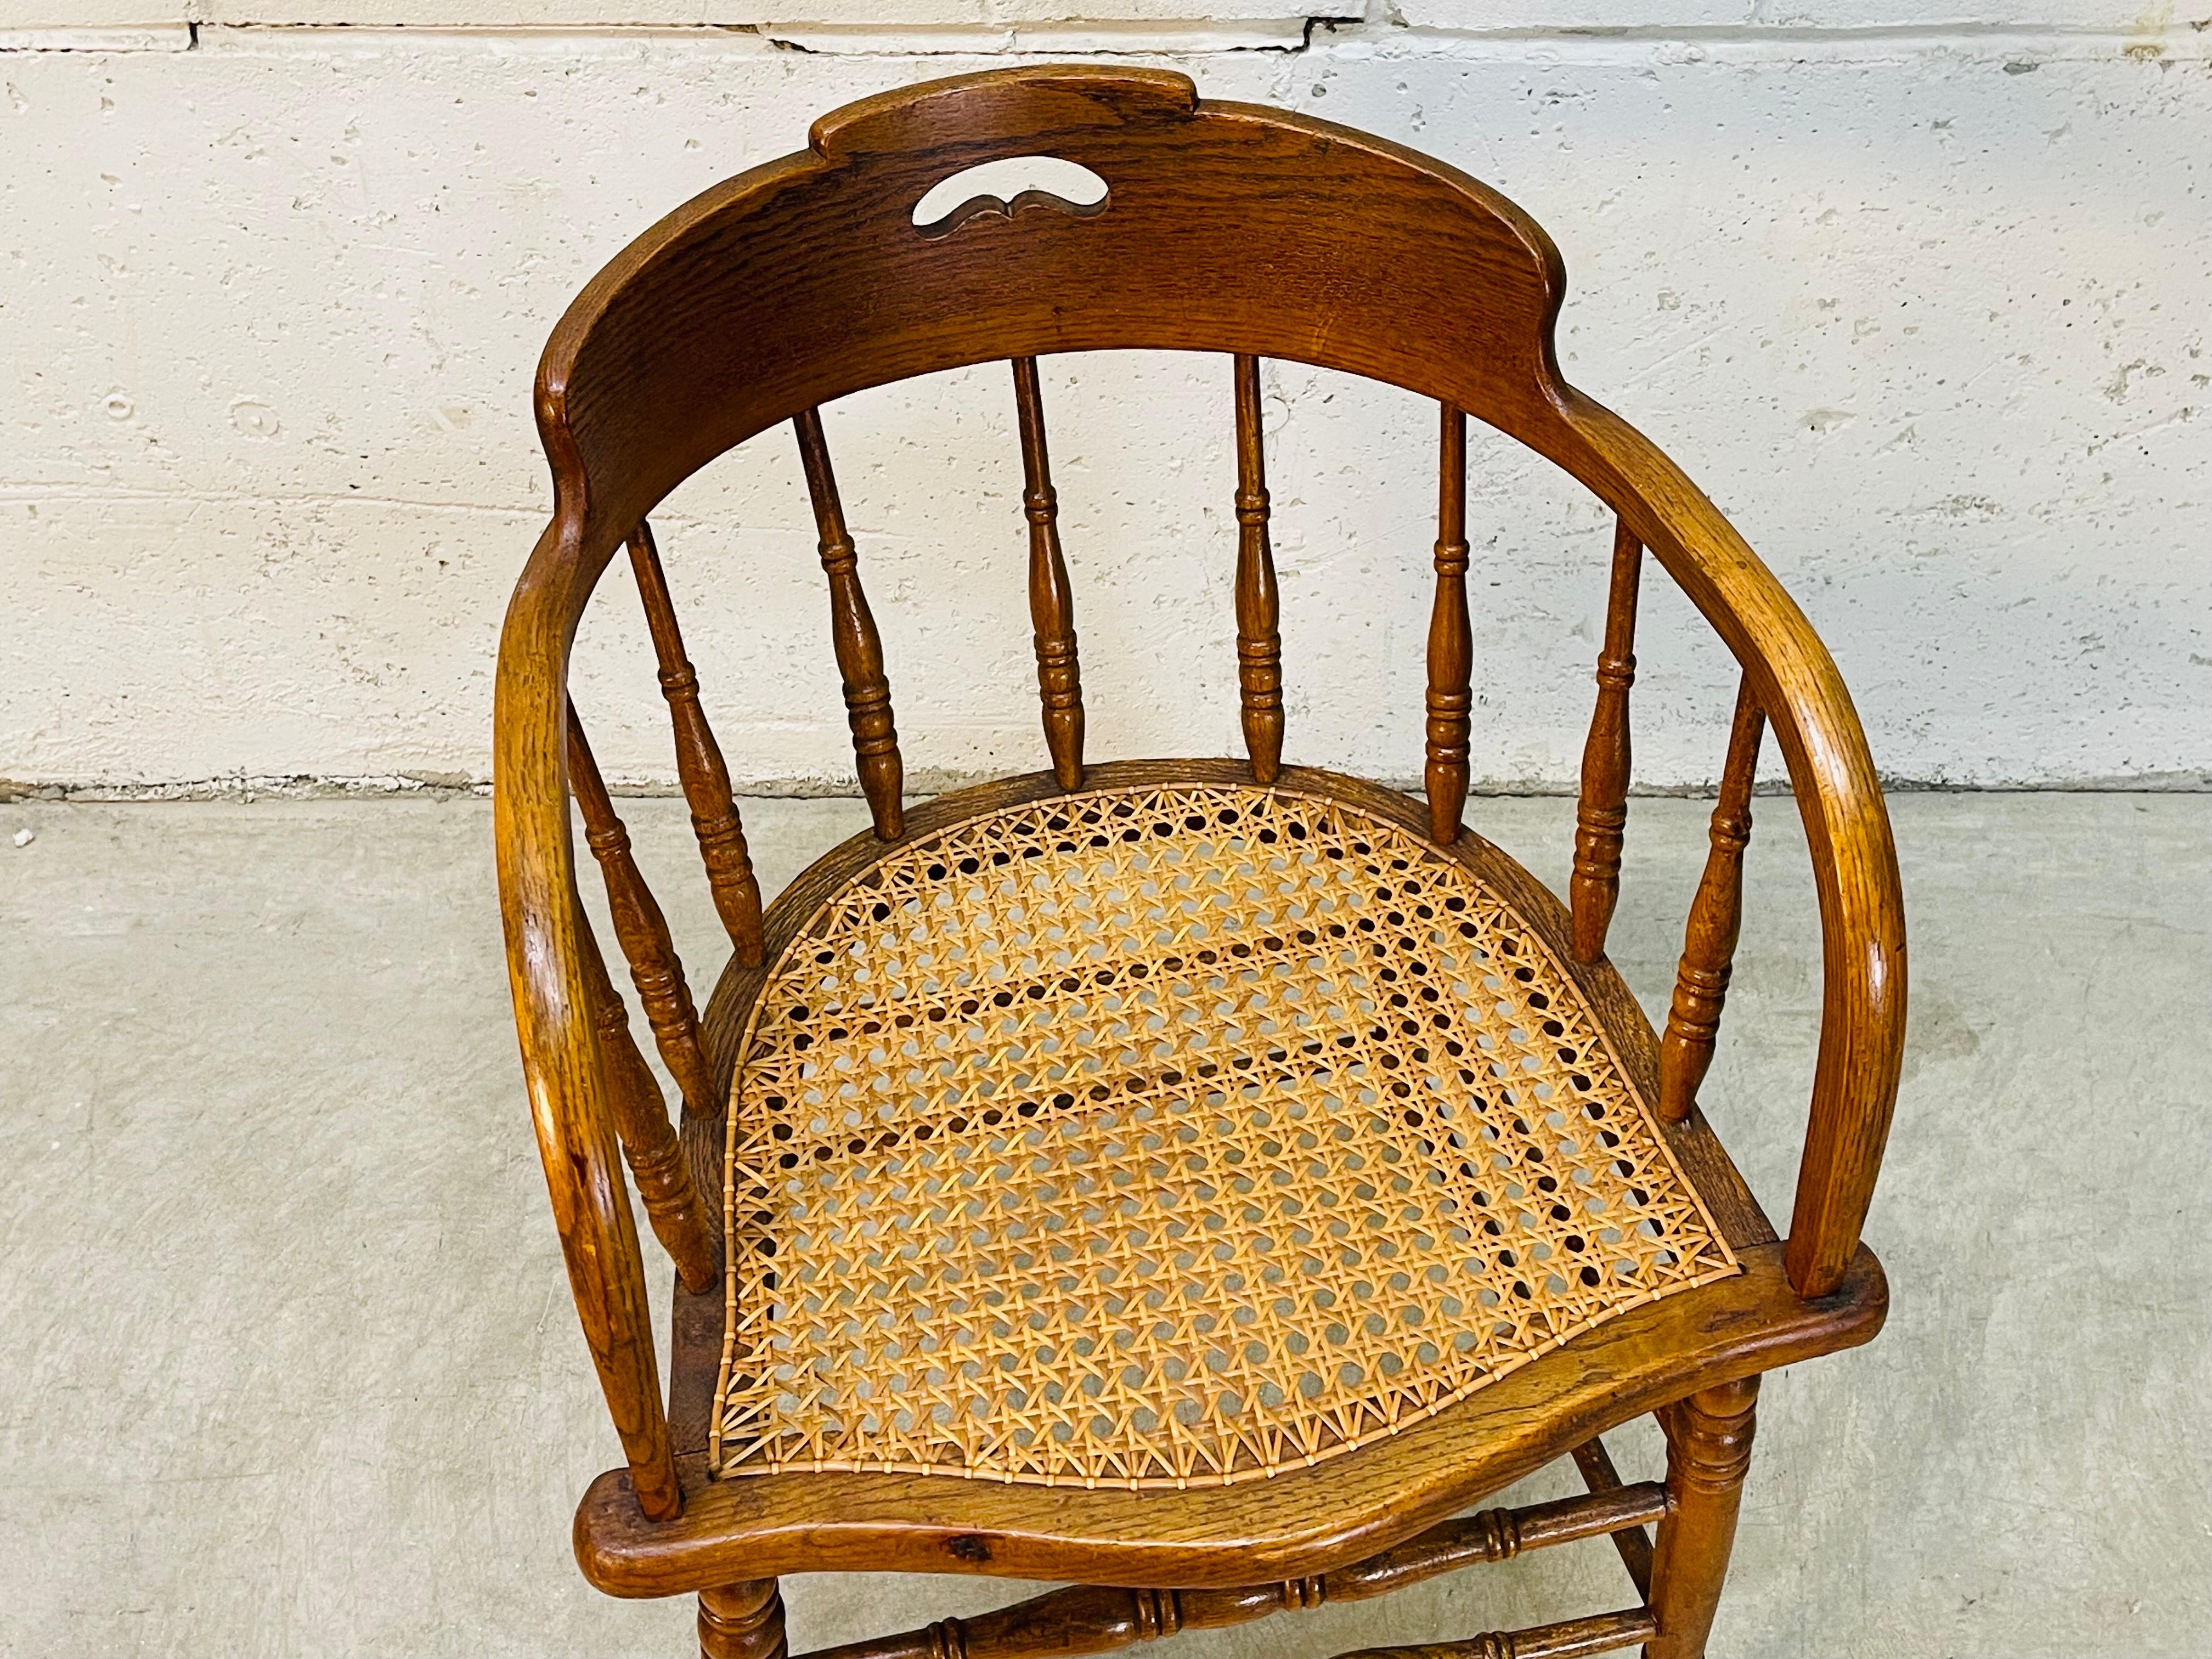 Vintage 1930s oak wood barrel style chair with a curved back and cane seat. Chair is sturdy and the cane is in excellent condition. Nice original patina to the wood. No marks.